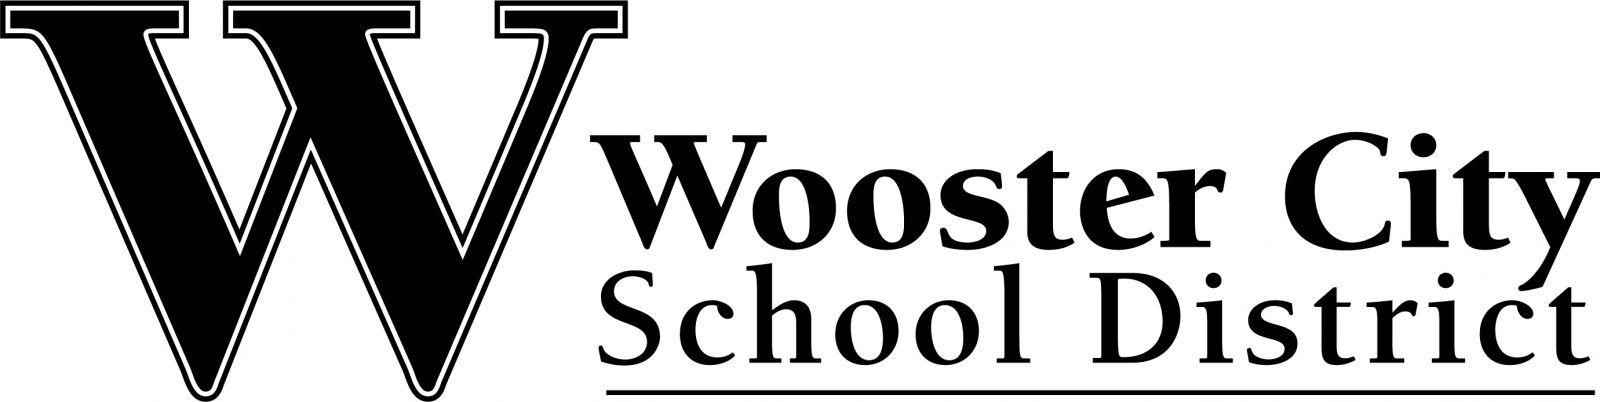 Black and White No Brand Logo - Our Brand | Wooster City Schools